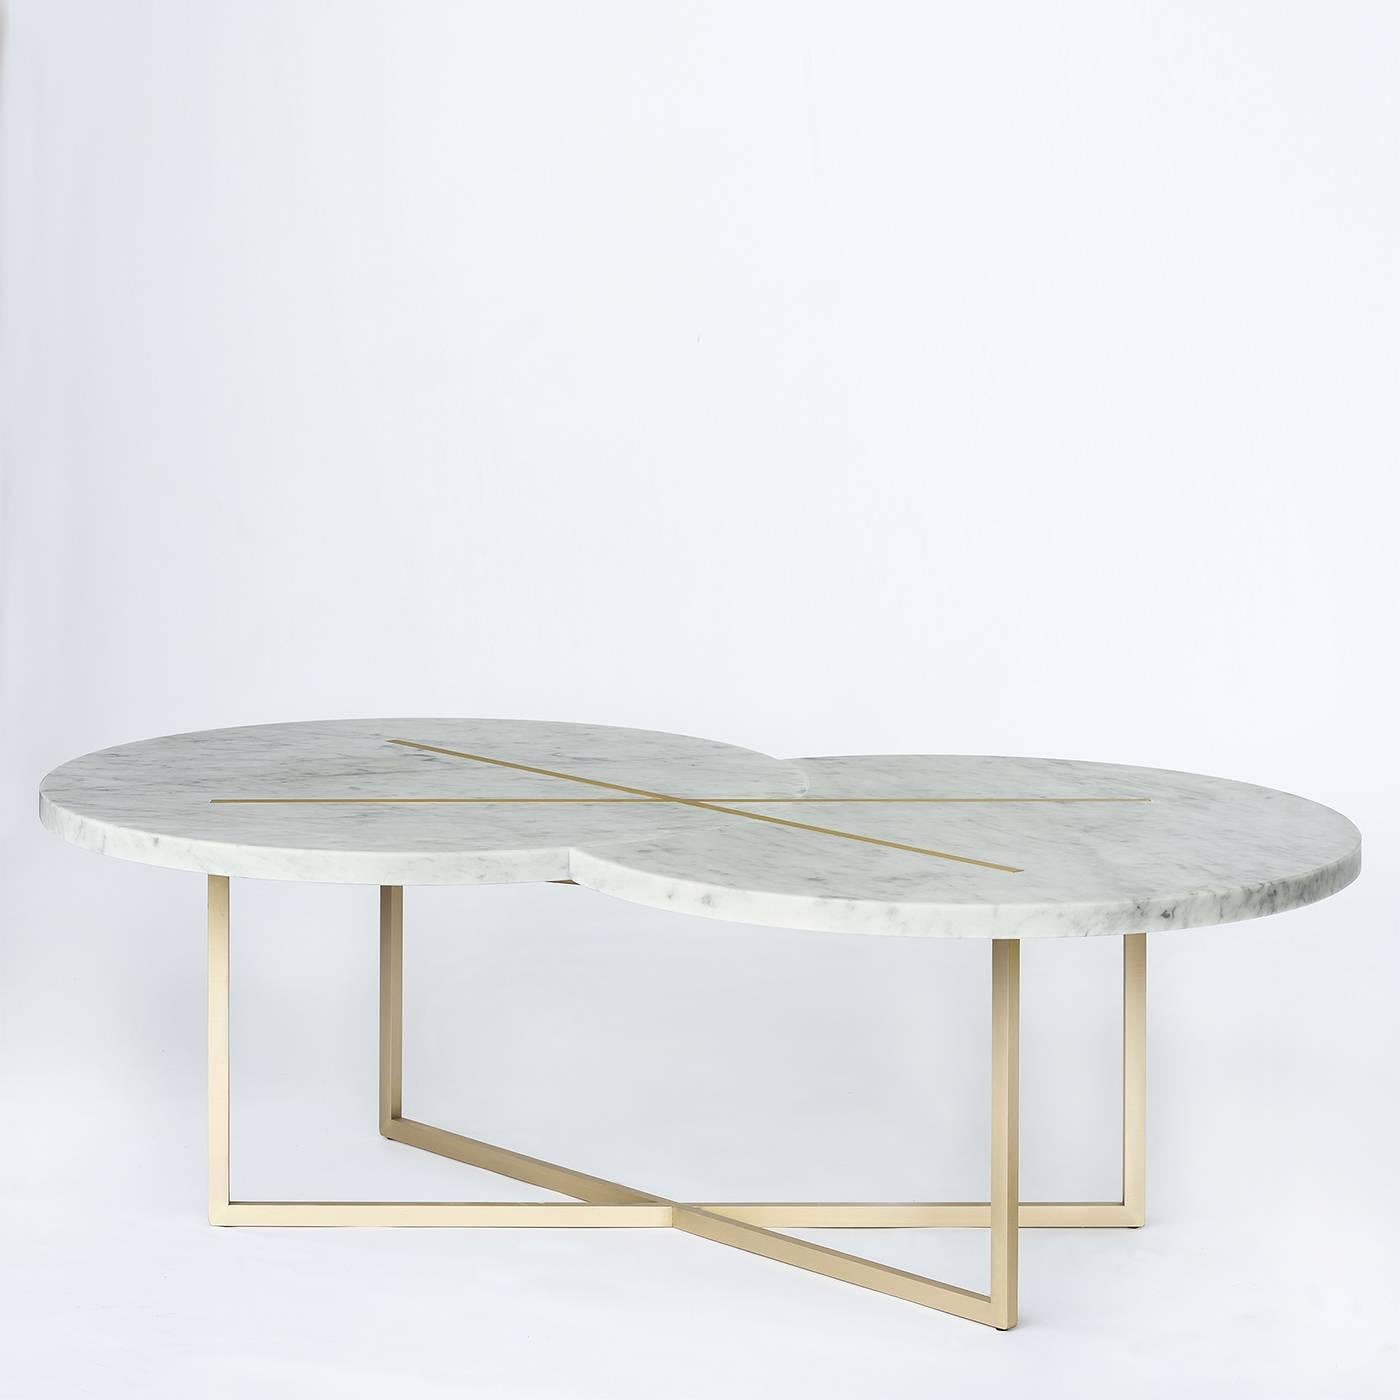 This exquisite coffee table belongs to the Eclipse series and features a top made of two crossing moons in white Carrara marble resting on a structure of slim tubular legs made of solid brushed brass for a Minimalist, elegant look.